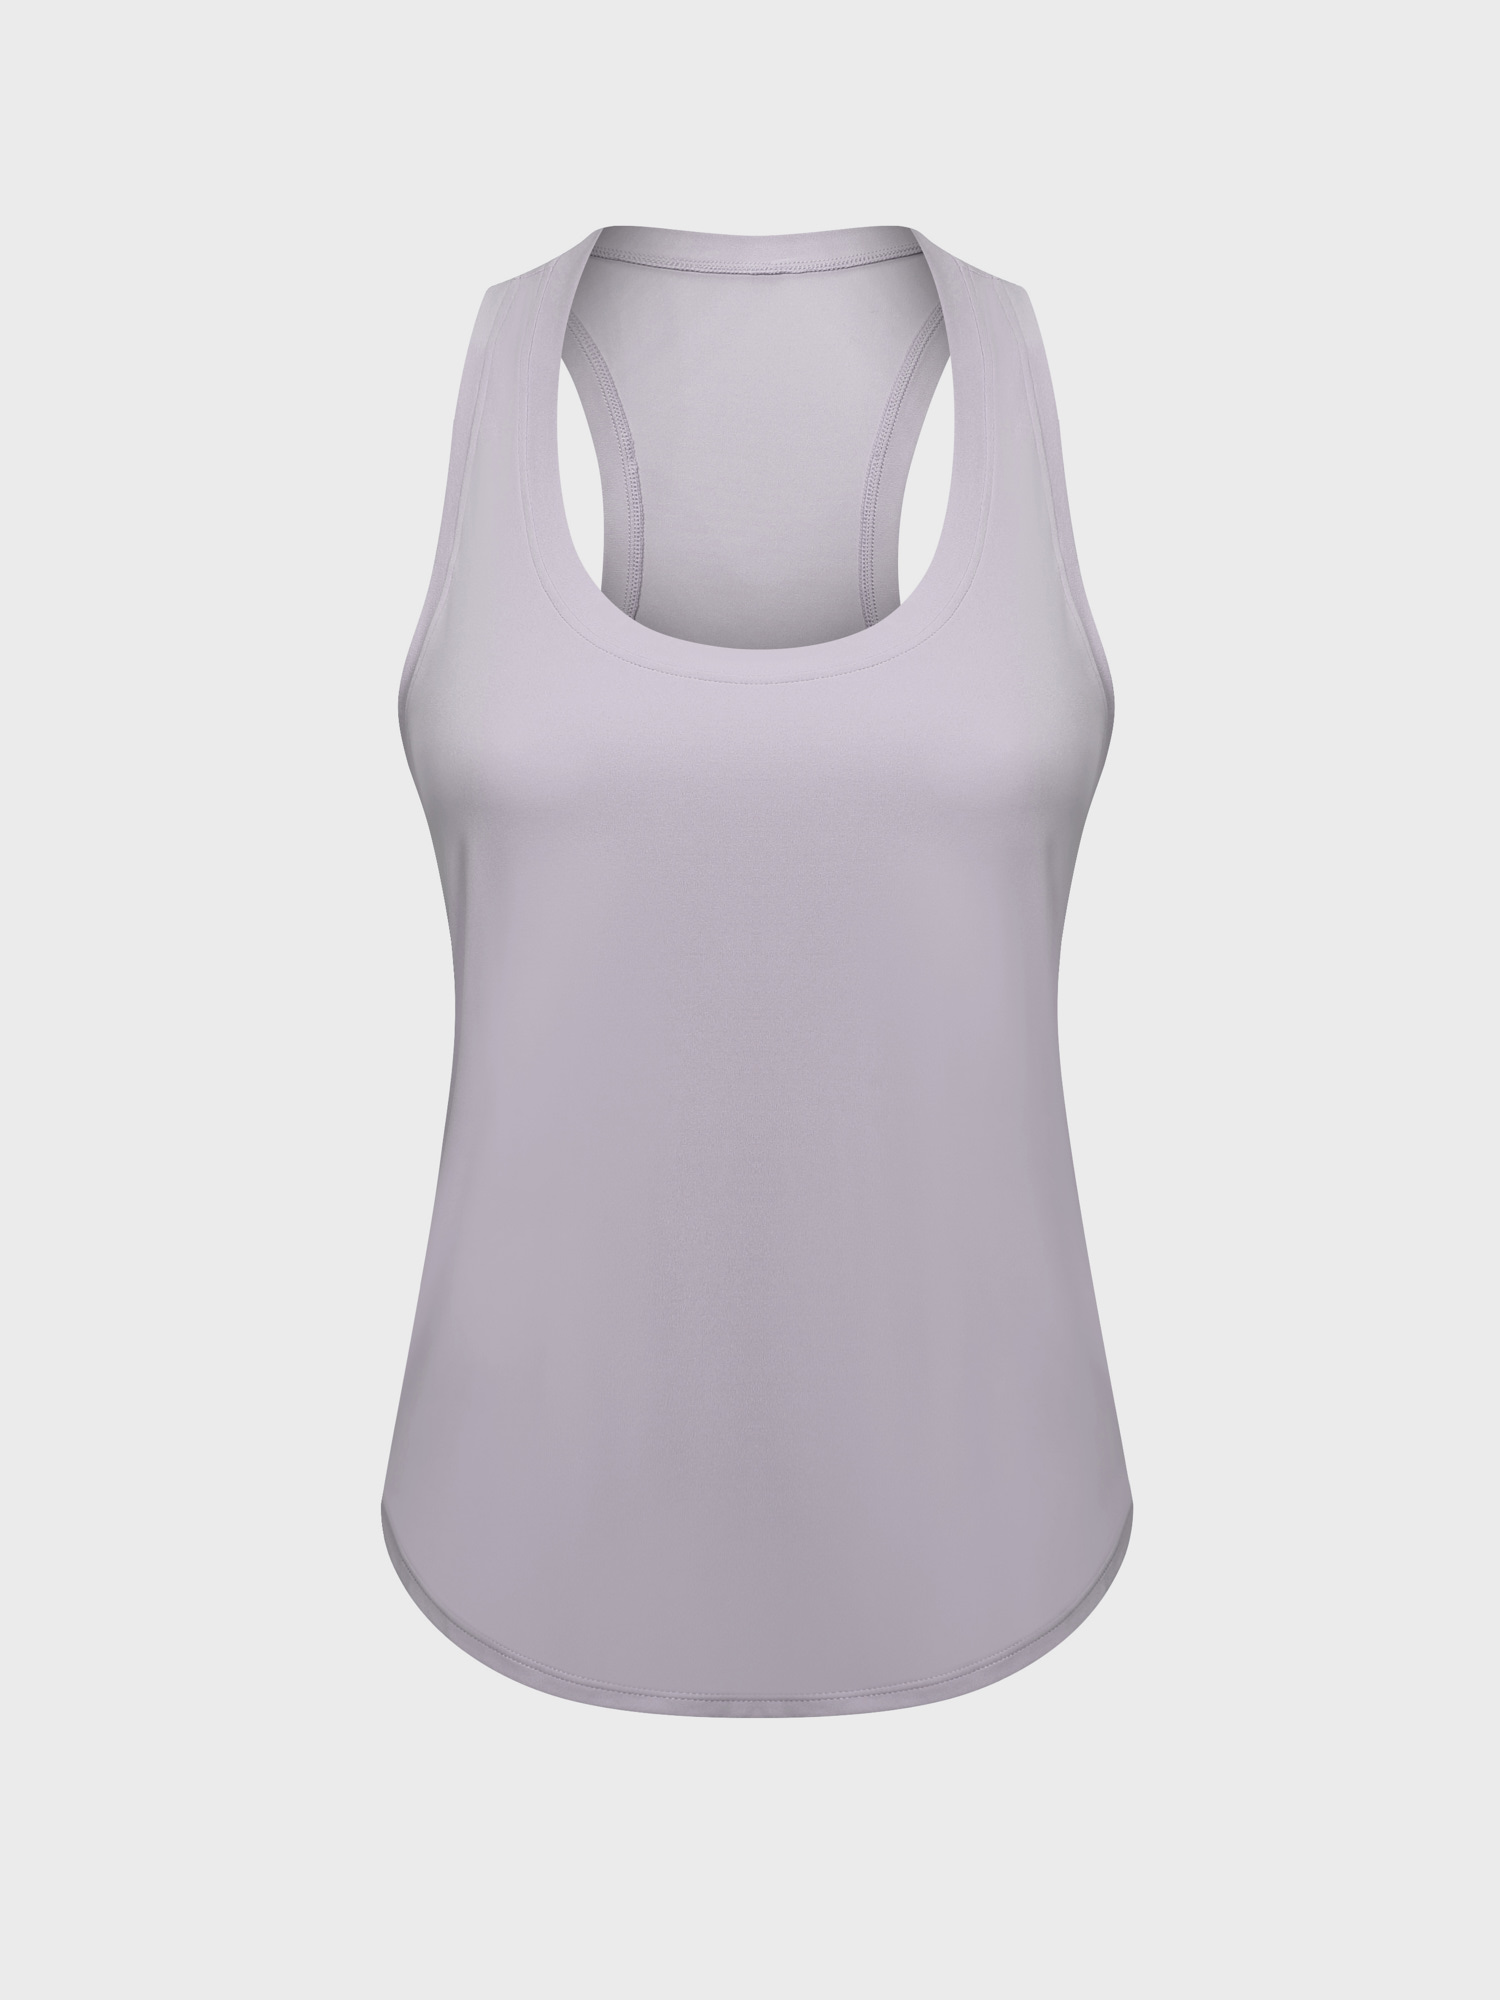 Midsize Racerback Nude Loose Breathable Quick-drying Yoga Sports Tank Top